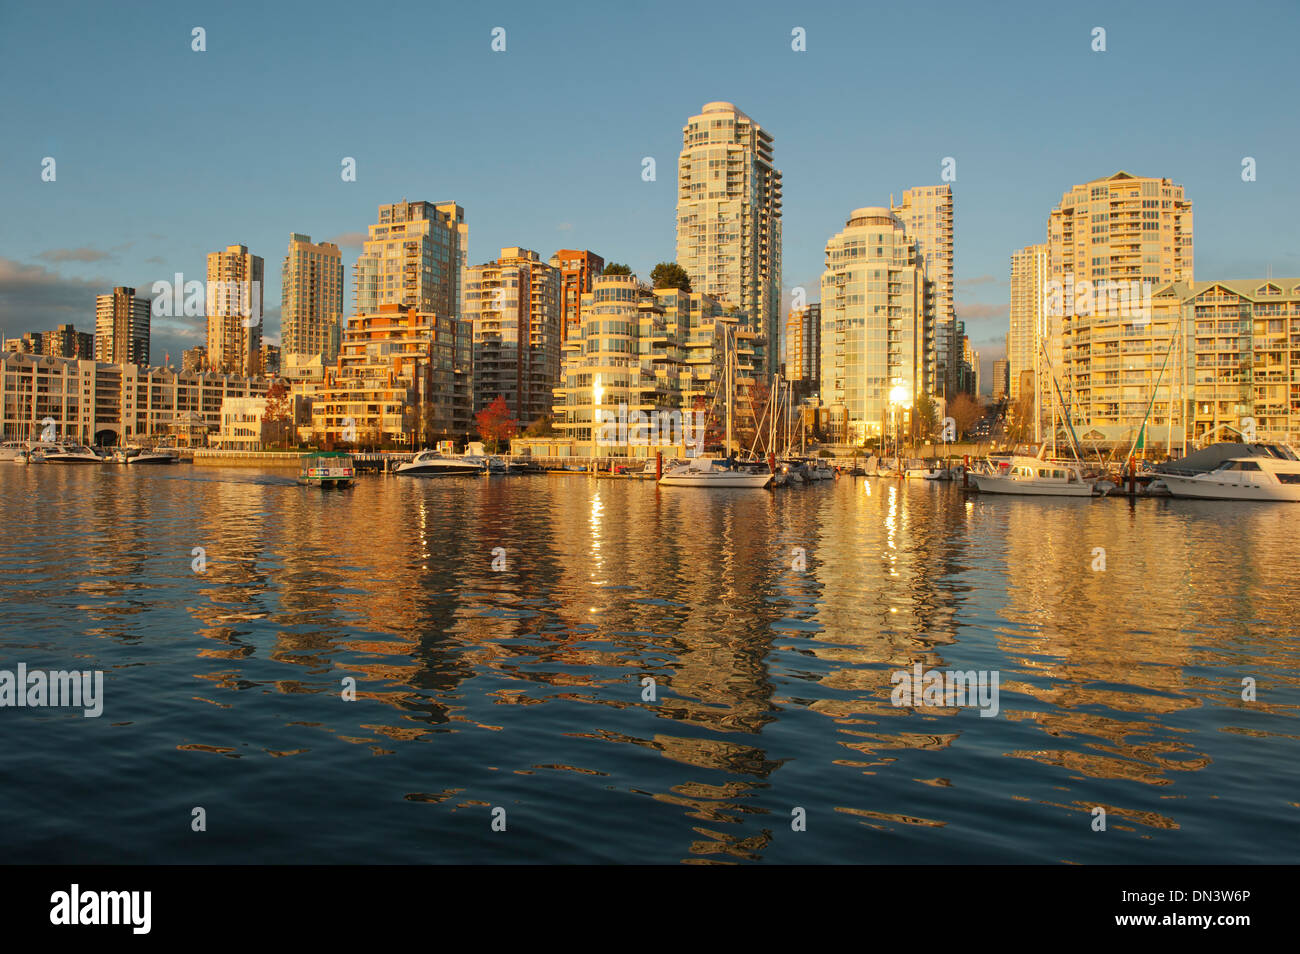 Reflection of Yaletown apartment buildings at sunset across False Creek from Granville Island, Vancouver BC  Canada Stock Photo